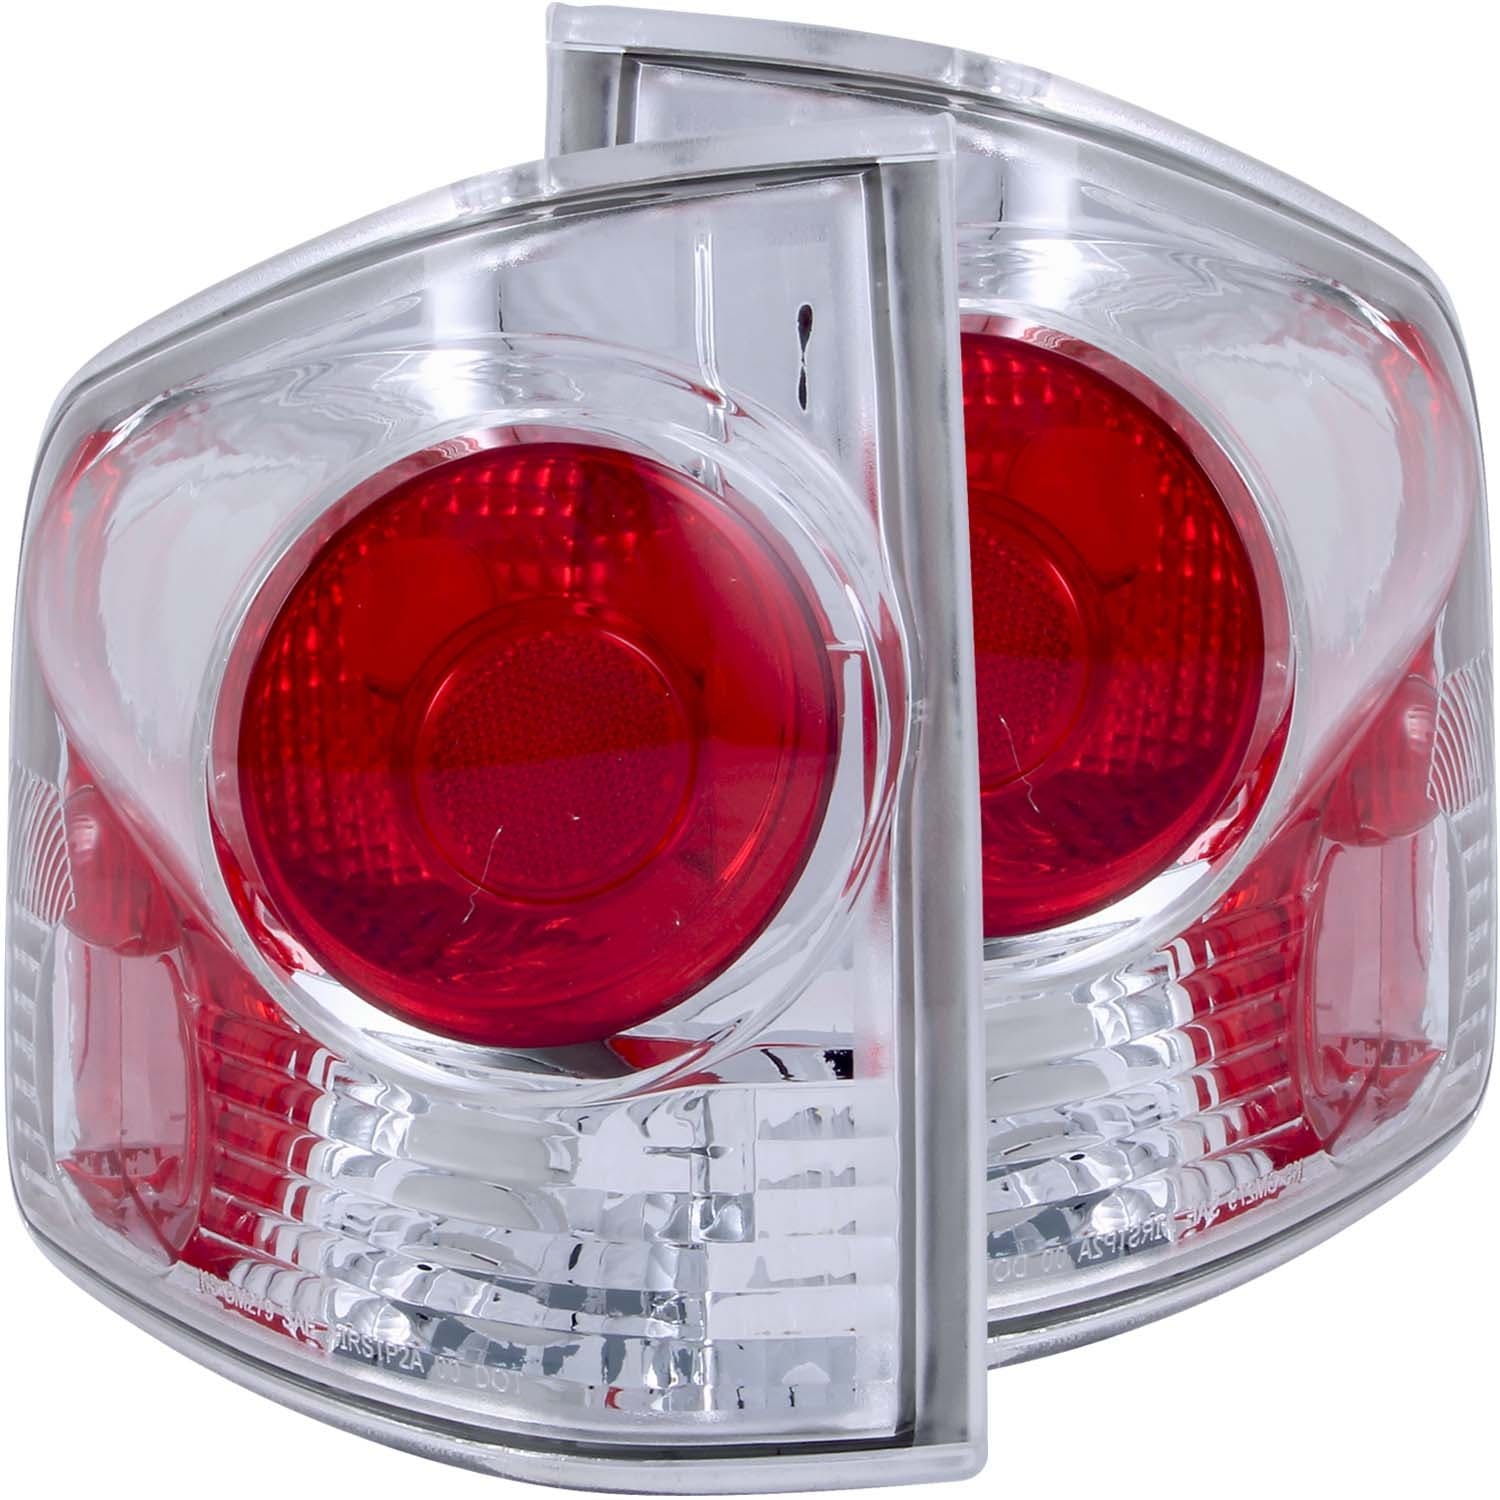 AnzoUSA 211032 Taillights Chrome 3D Style